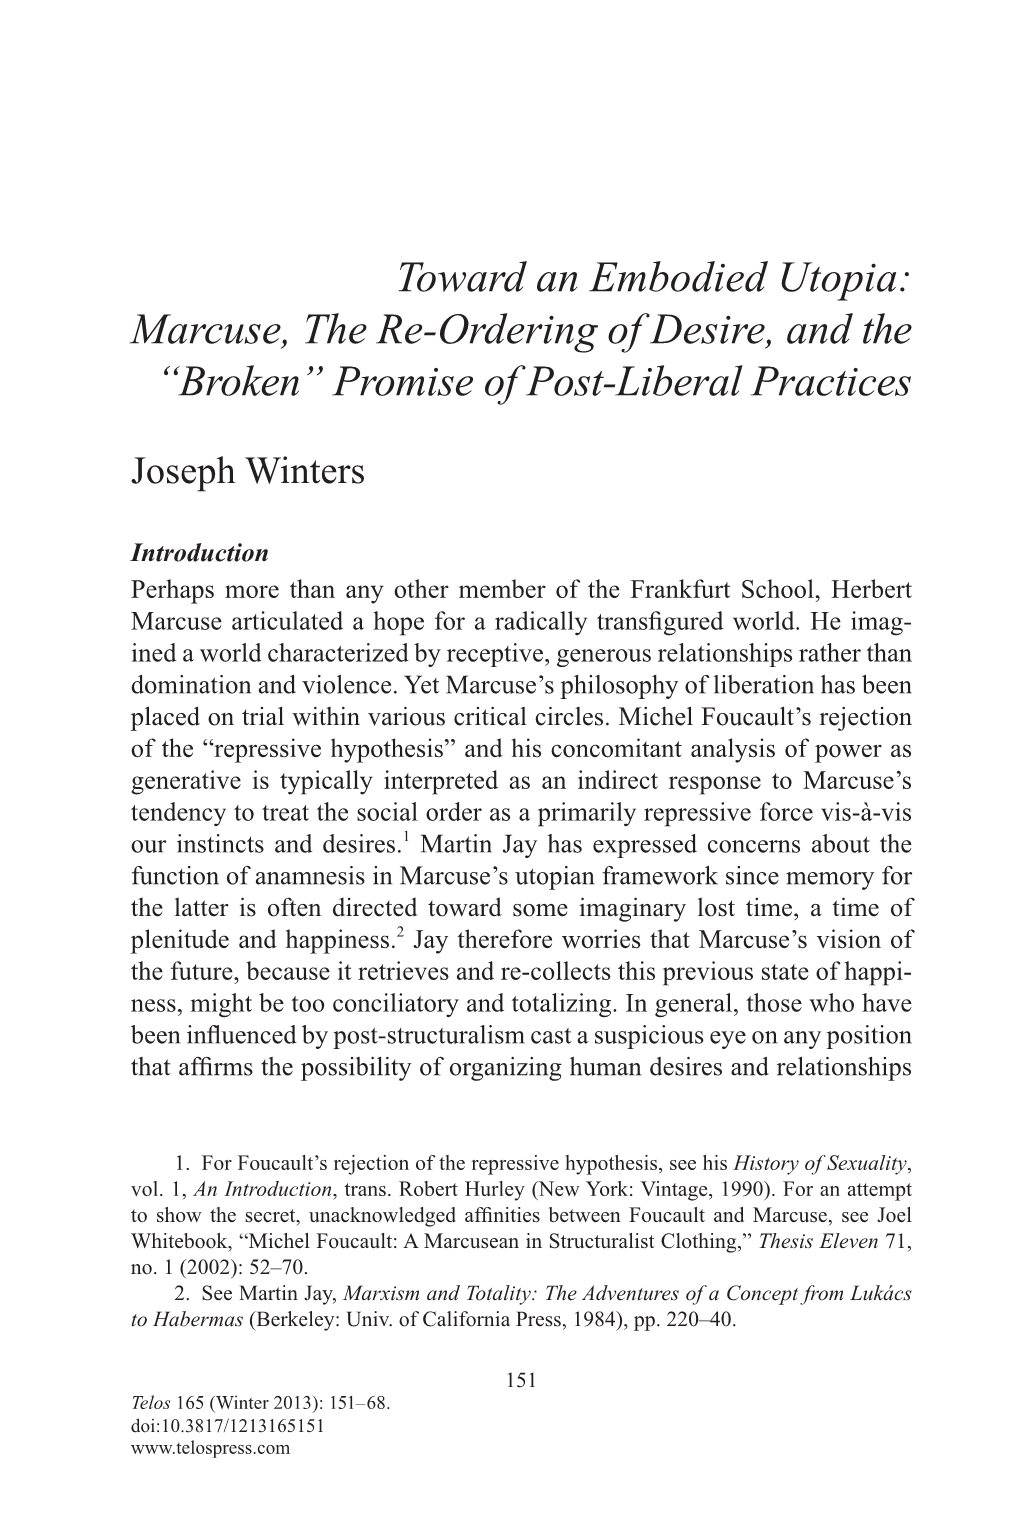 Toward an Embodied Utopia: Marcuse, the Re-Ordering of Desire, and the “Broken” Promise of Post-Liberal Practices